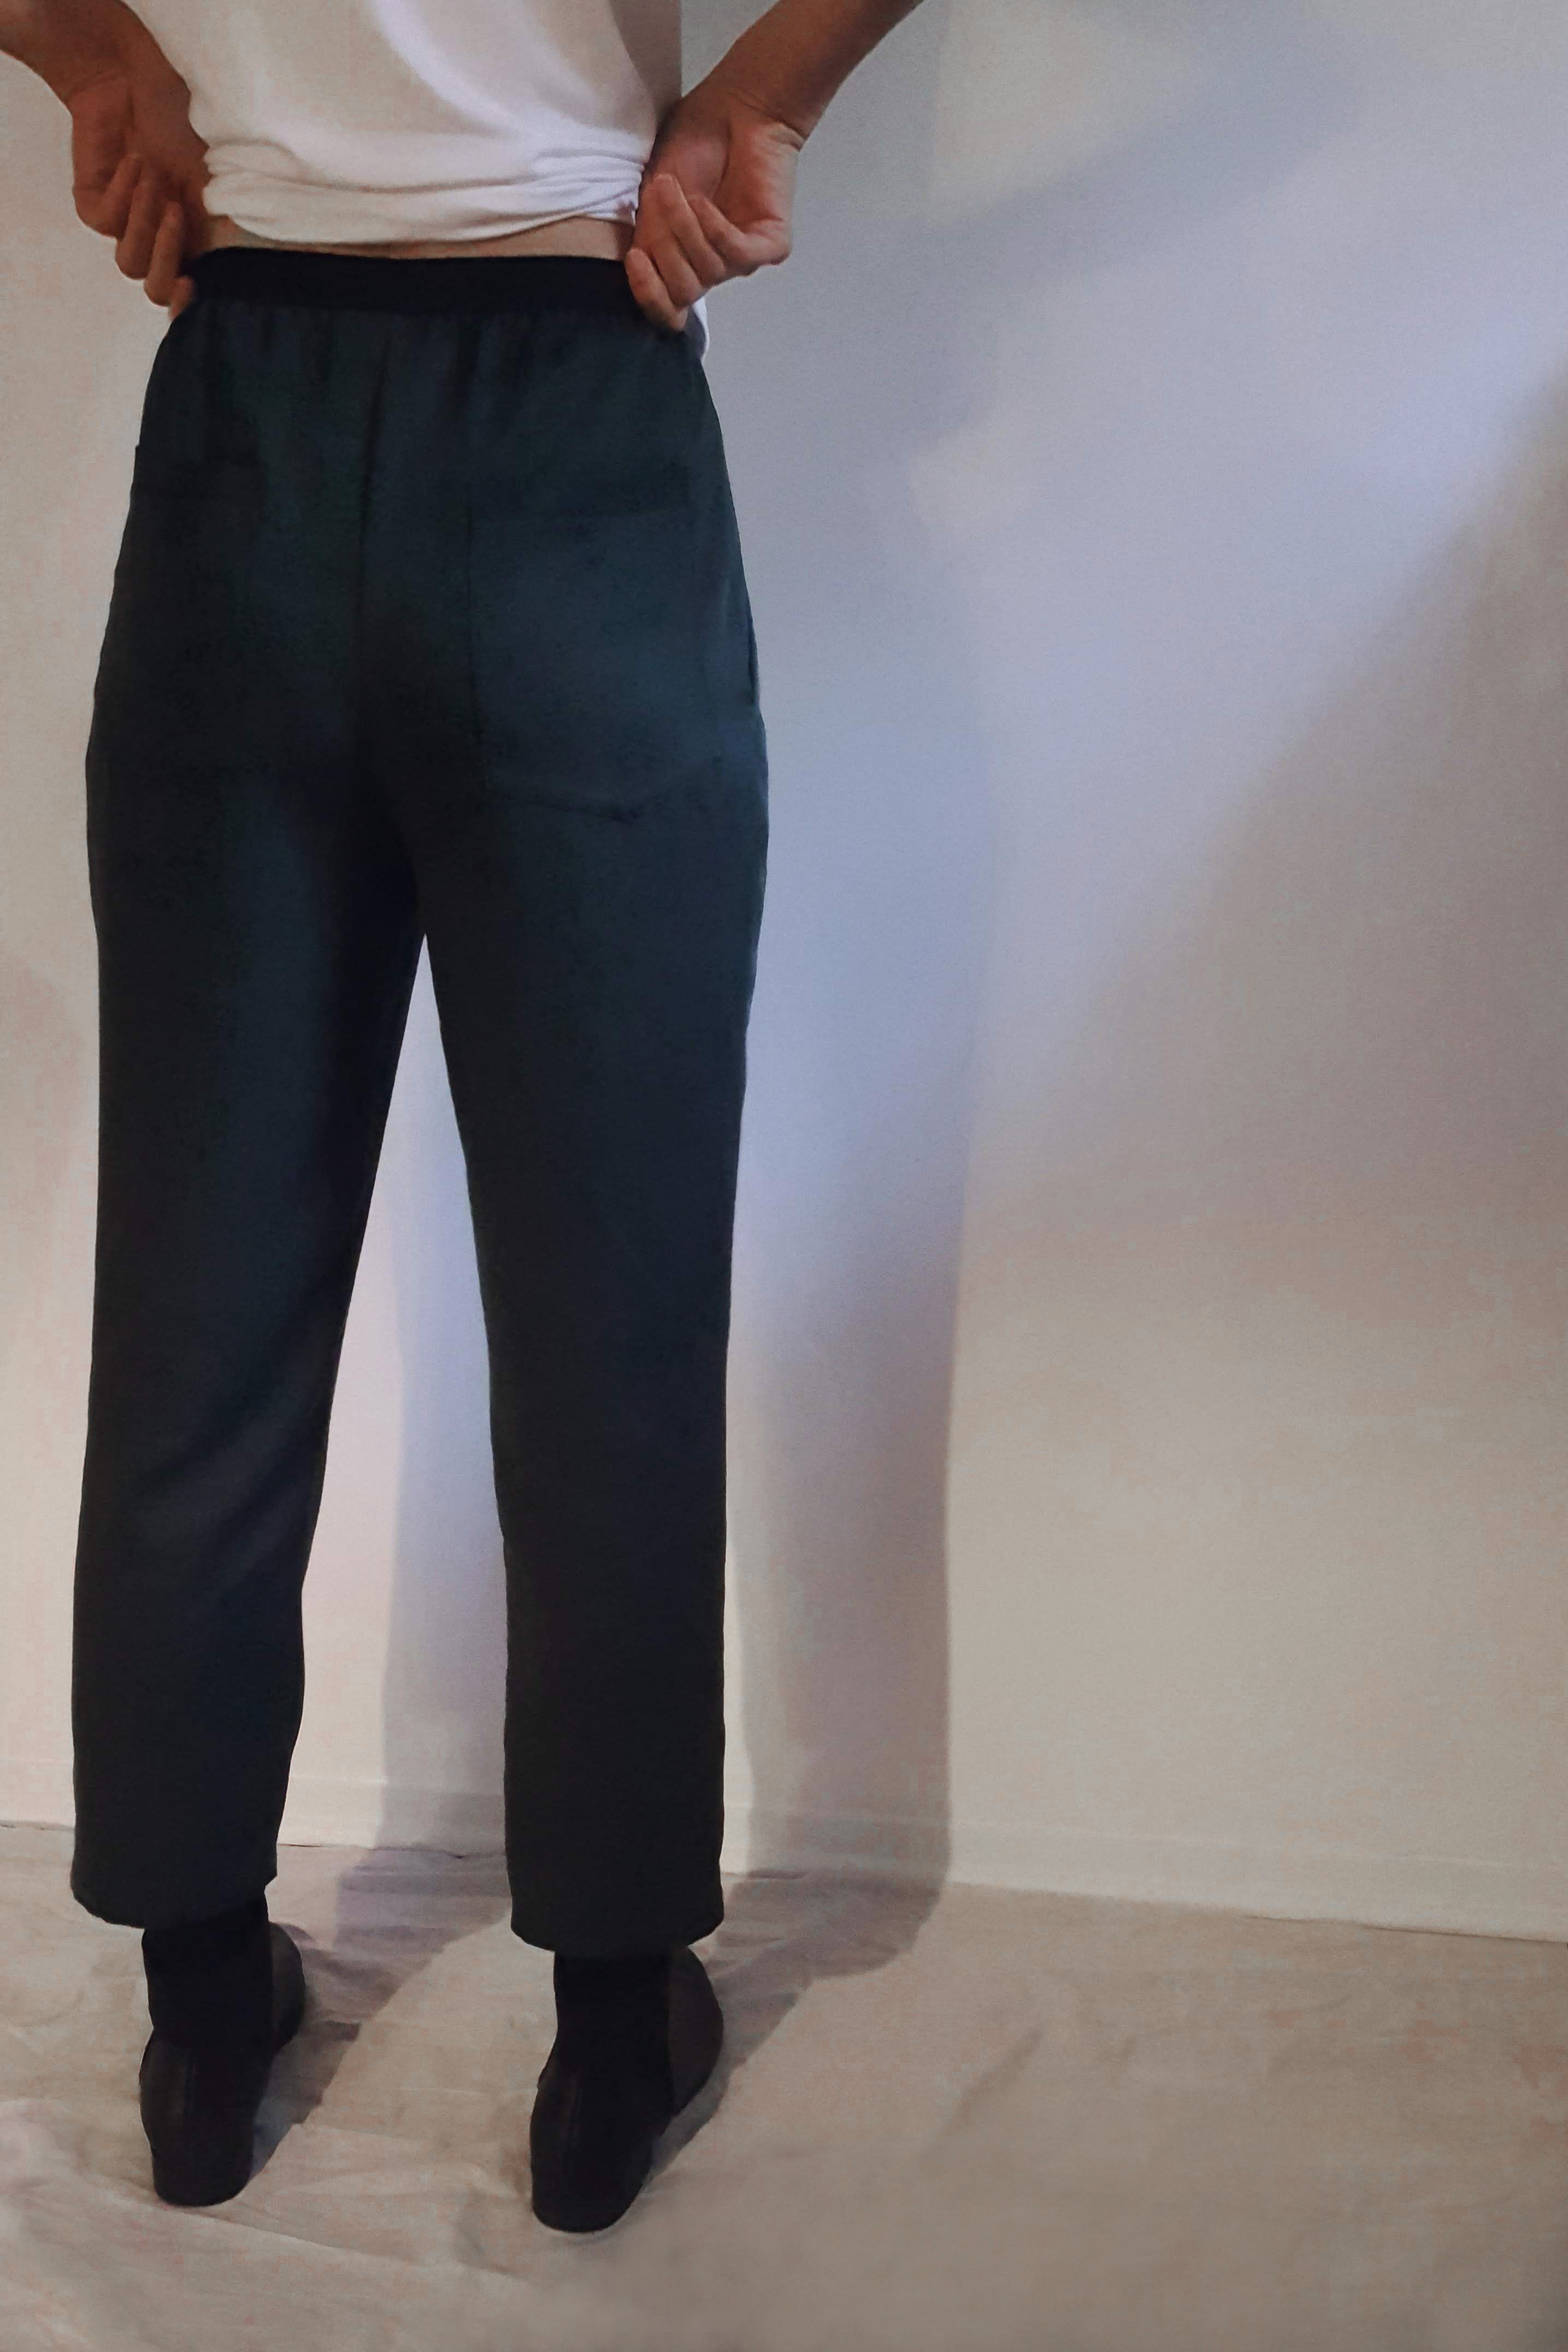 Pleated pants with elastic waist by Josiane Perron made in Canada